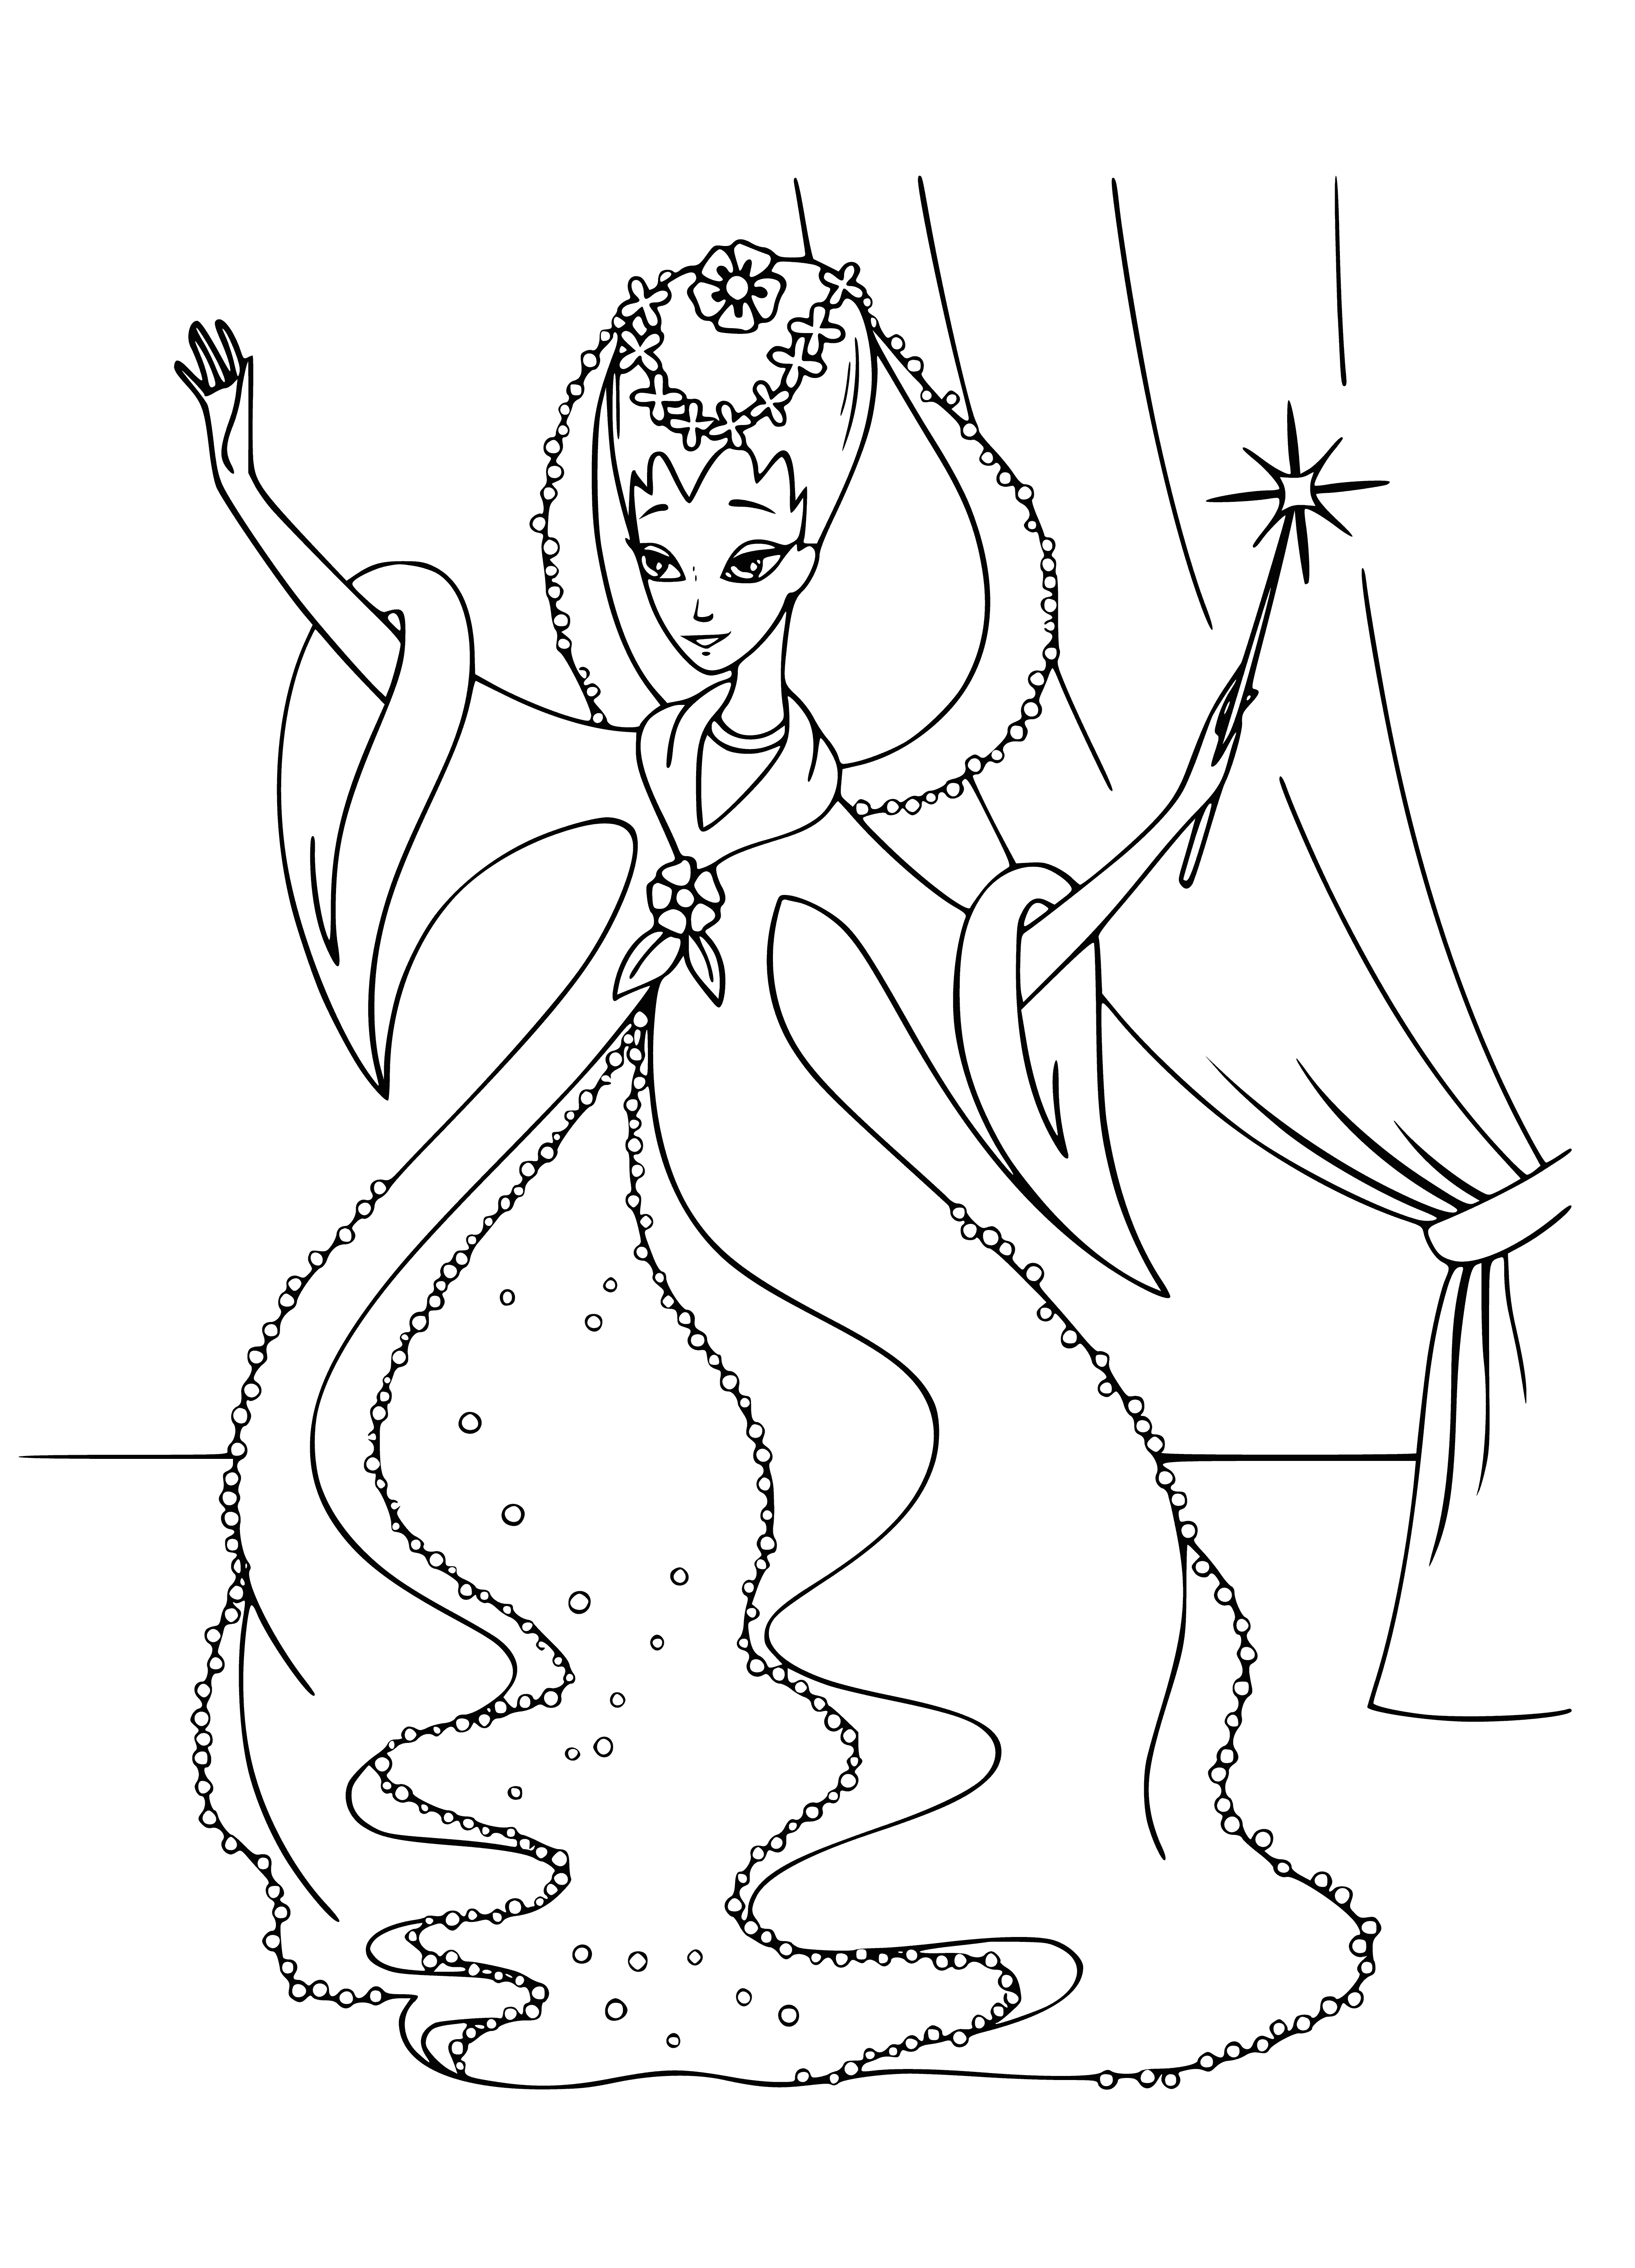 coloring page: Fairy Godmother is a magical being who grants Cinderella's wish to go to the ball. She is kind and wise, wearing a white dress and holding a wand.